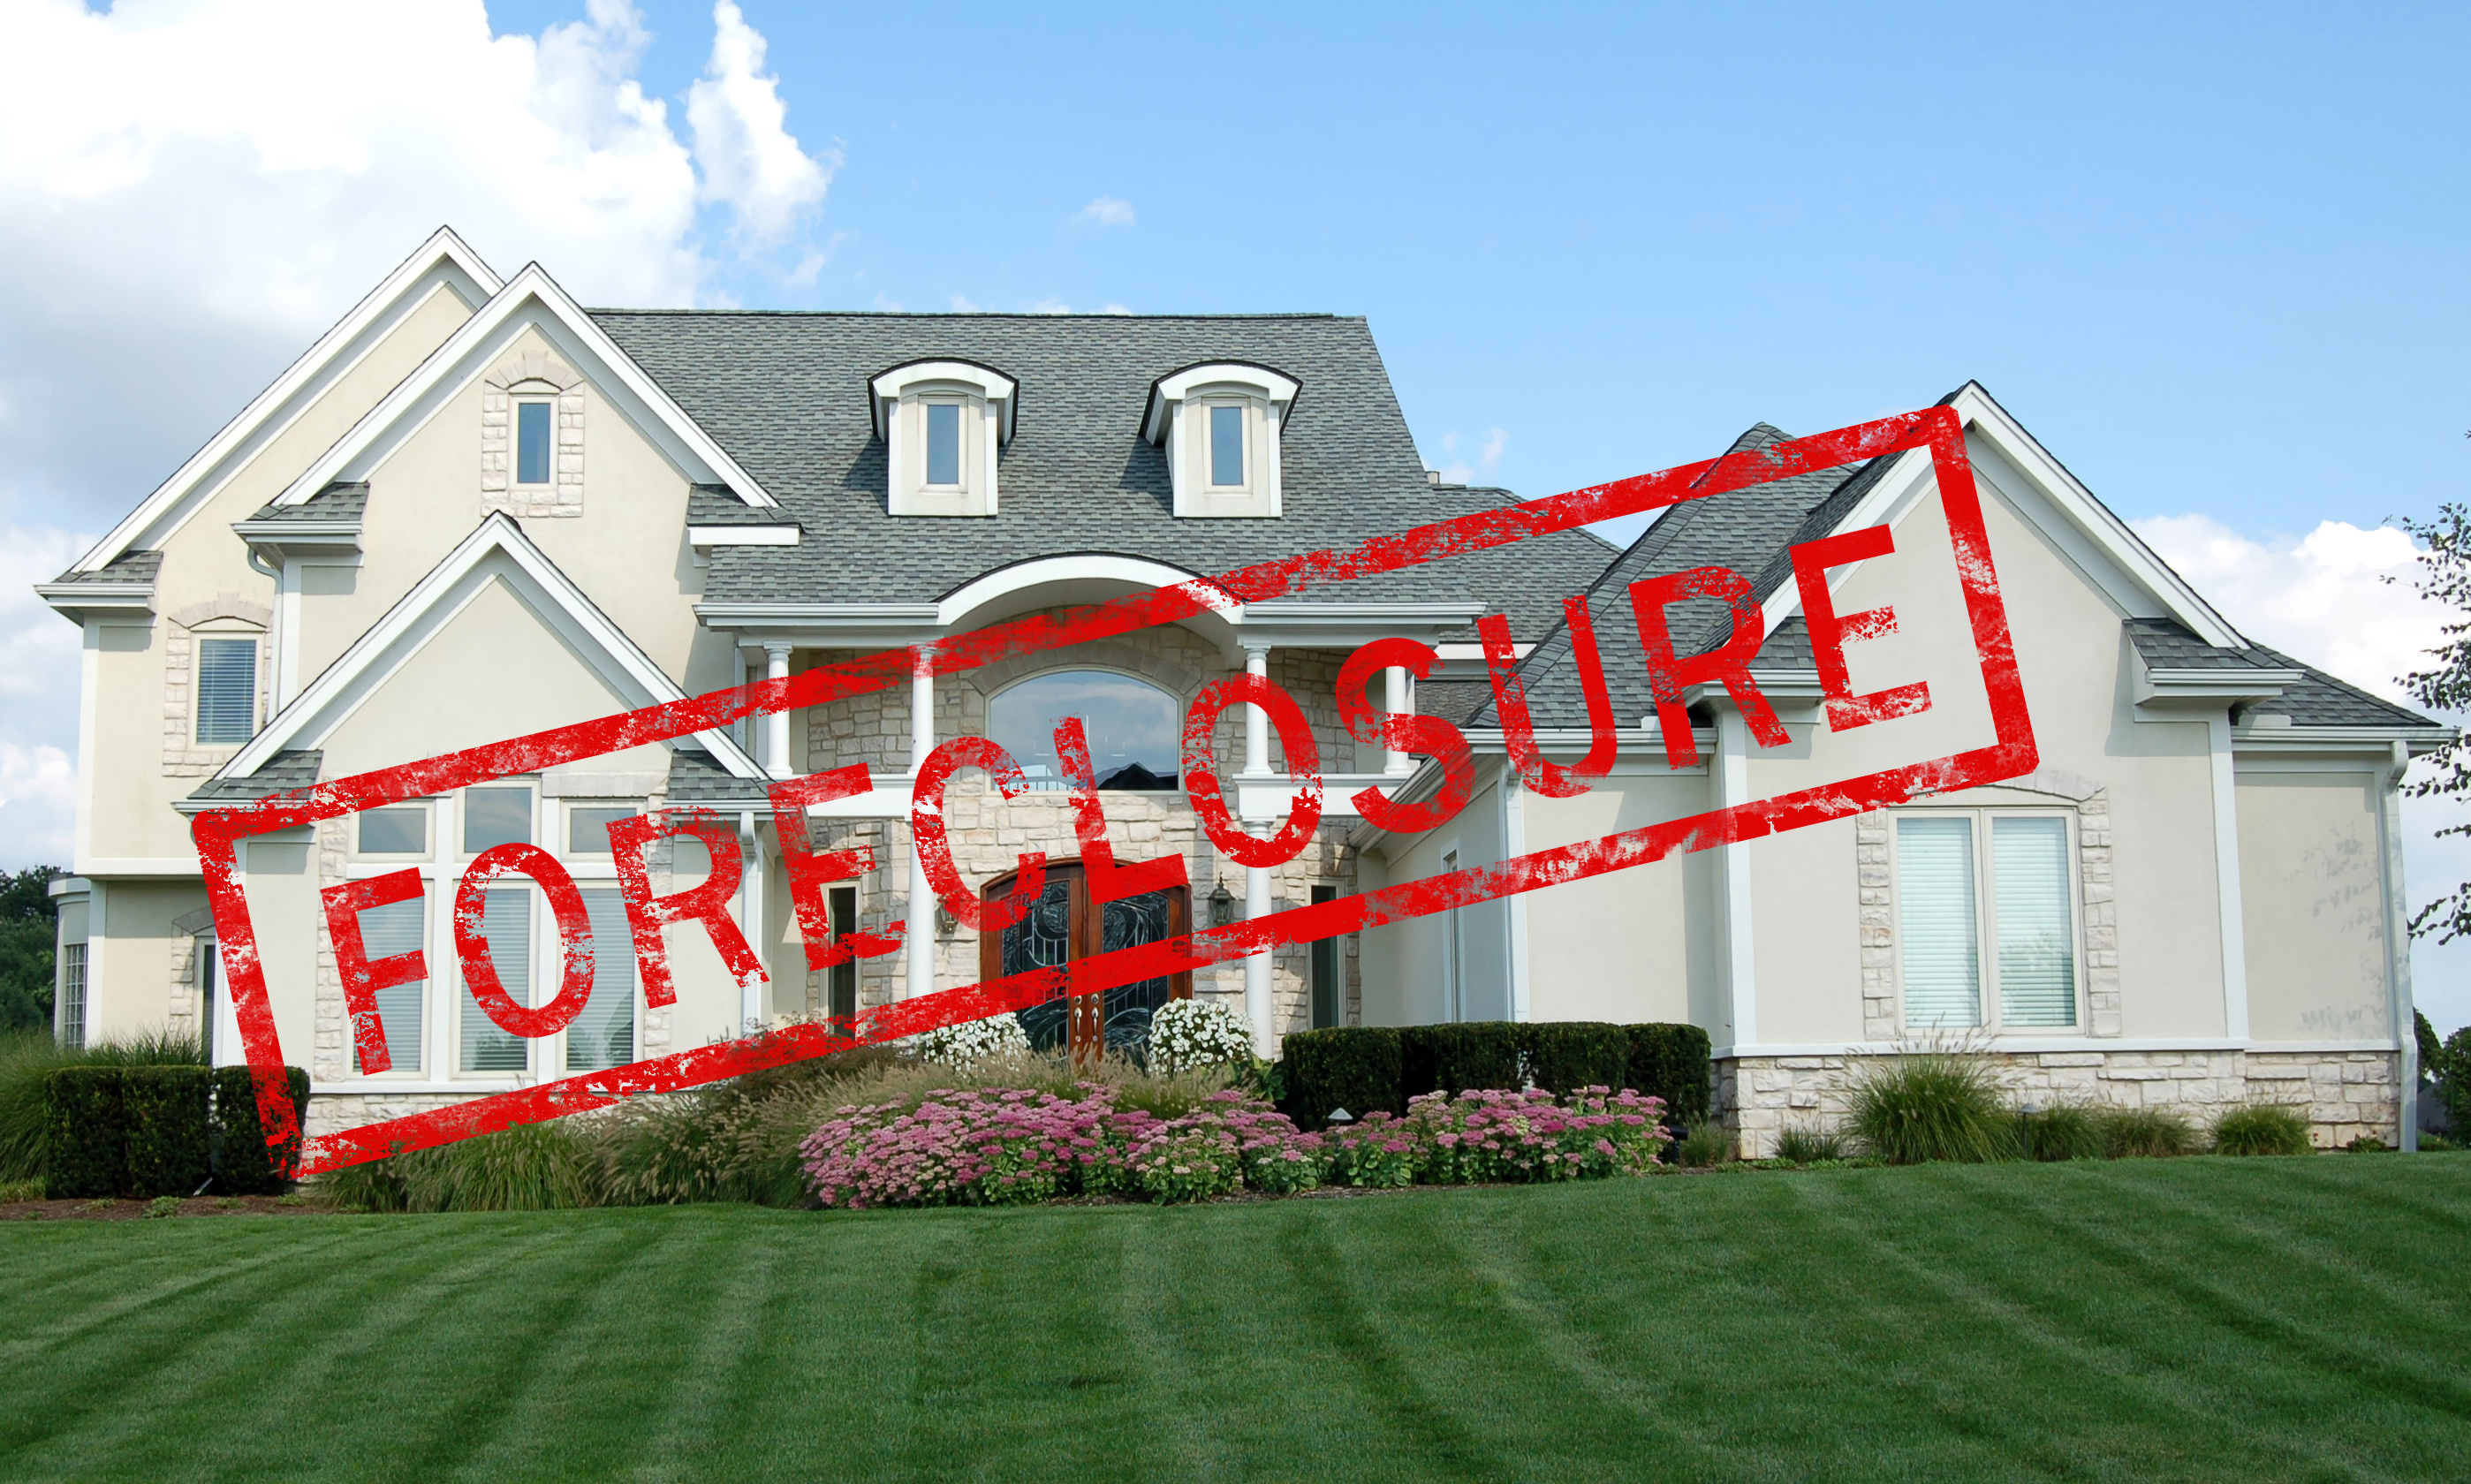 Call JoAnn Ray Appraisal when you need appraisals for New Haven foreclosures